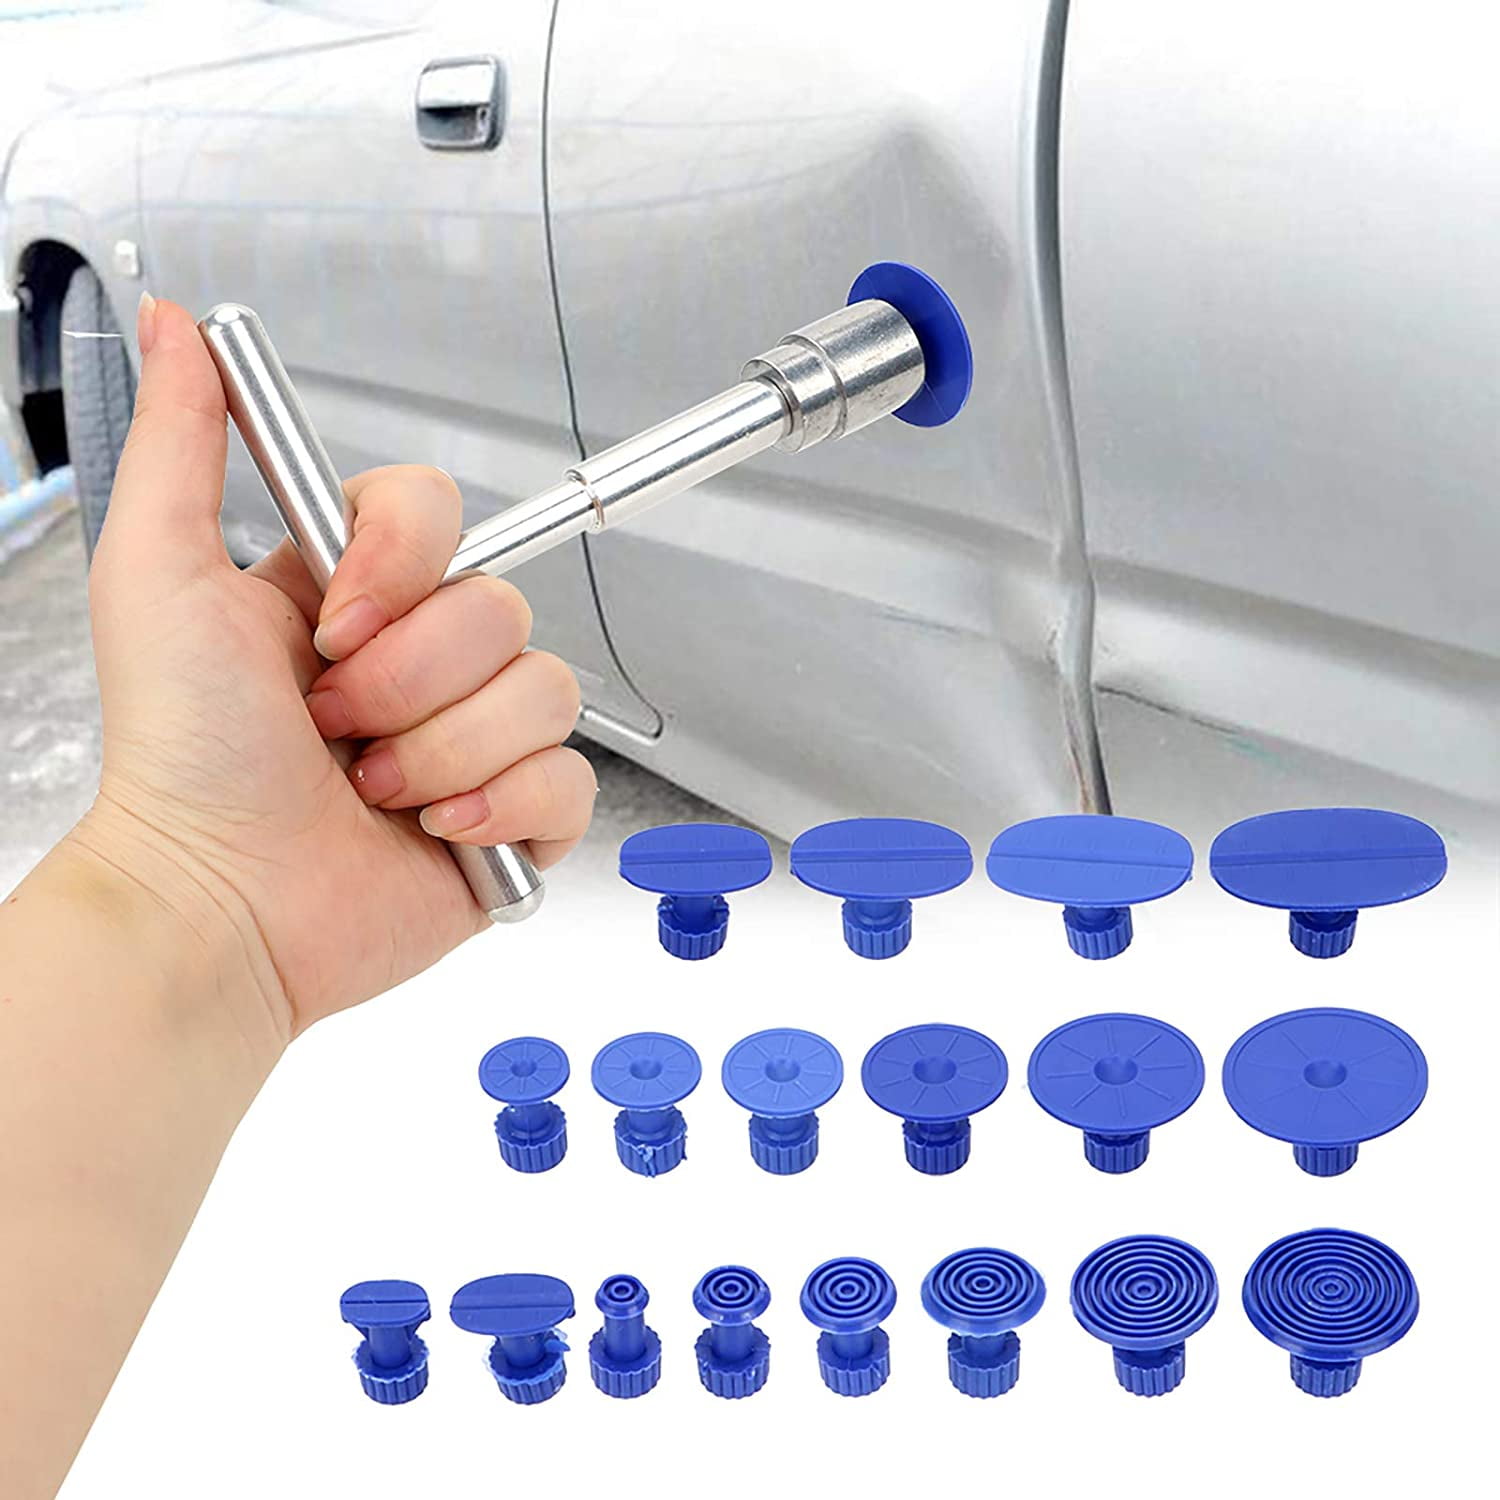 Car Dent Puller Kit with Slide Auto Body Paintless Dent Removal Kit